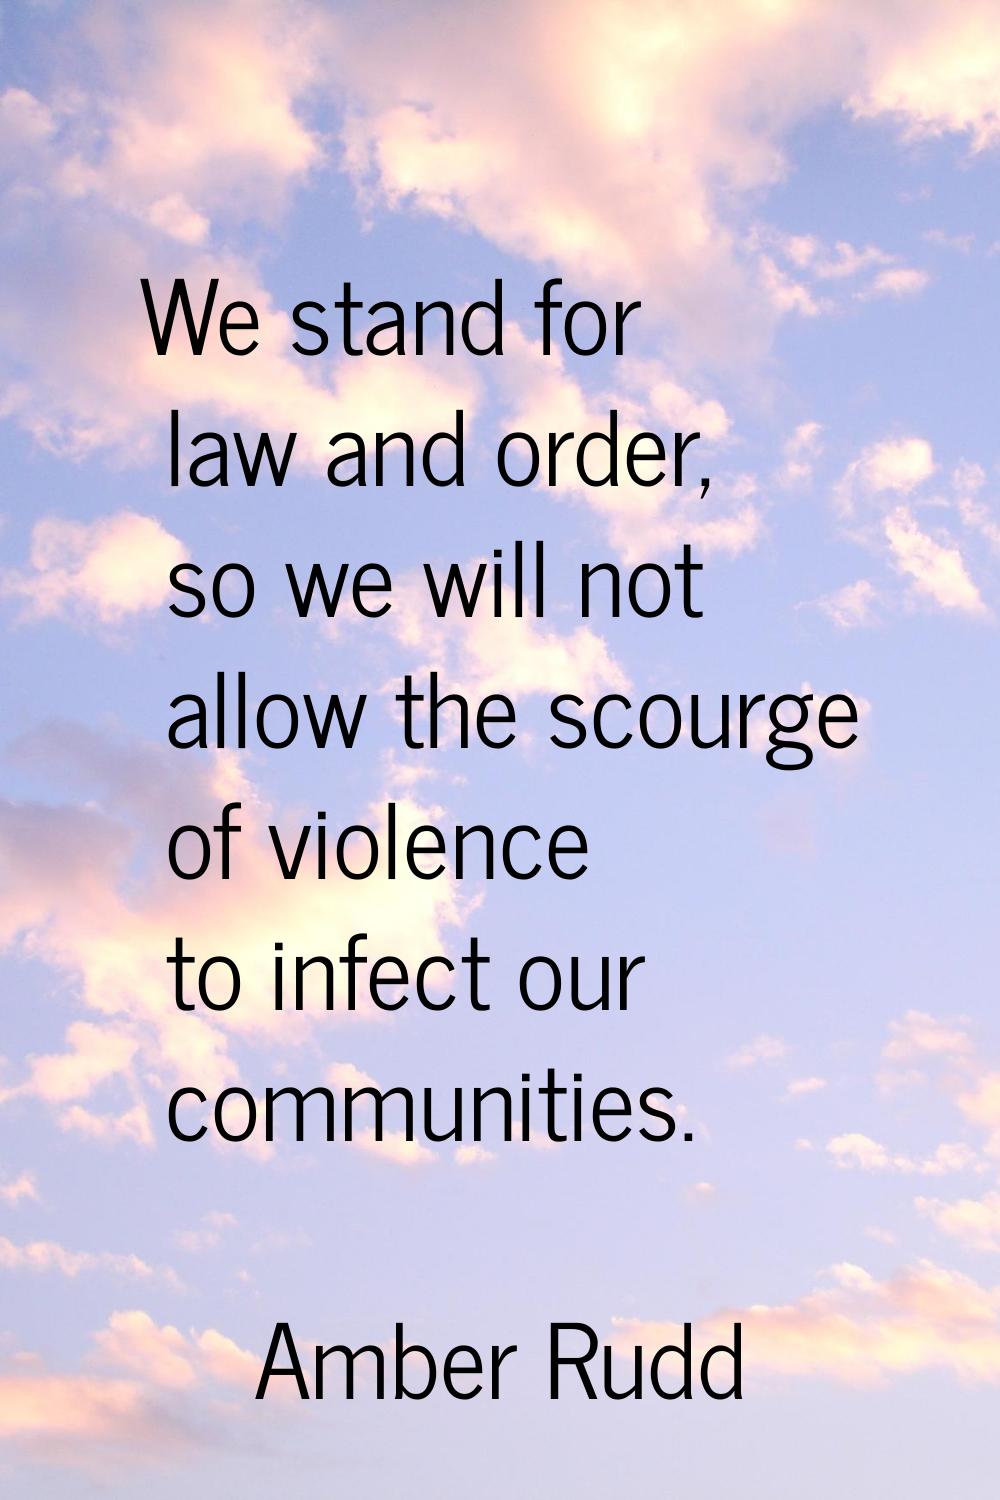 We stand for law and order, so we will not allow the scourge of violence to infect our communities.